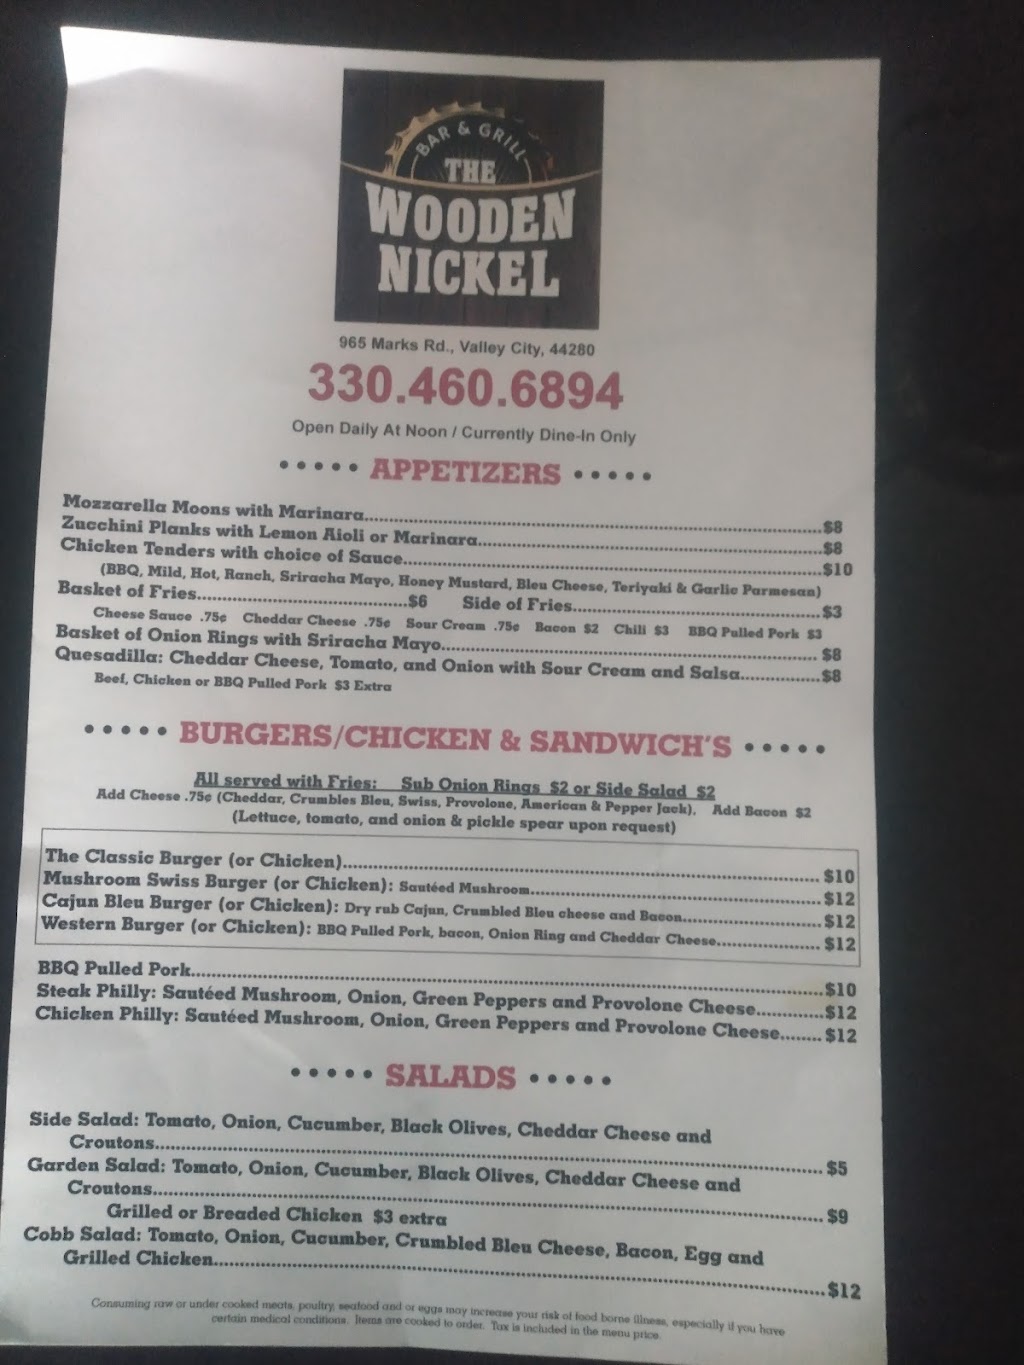 Wooden Nickel Bar & Grill | restaurant | 965 Marks Rd, Valley City, OH 44280, USA | 3304606894 OR +1 330-460-6894